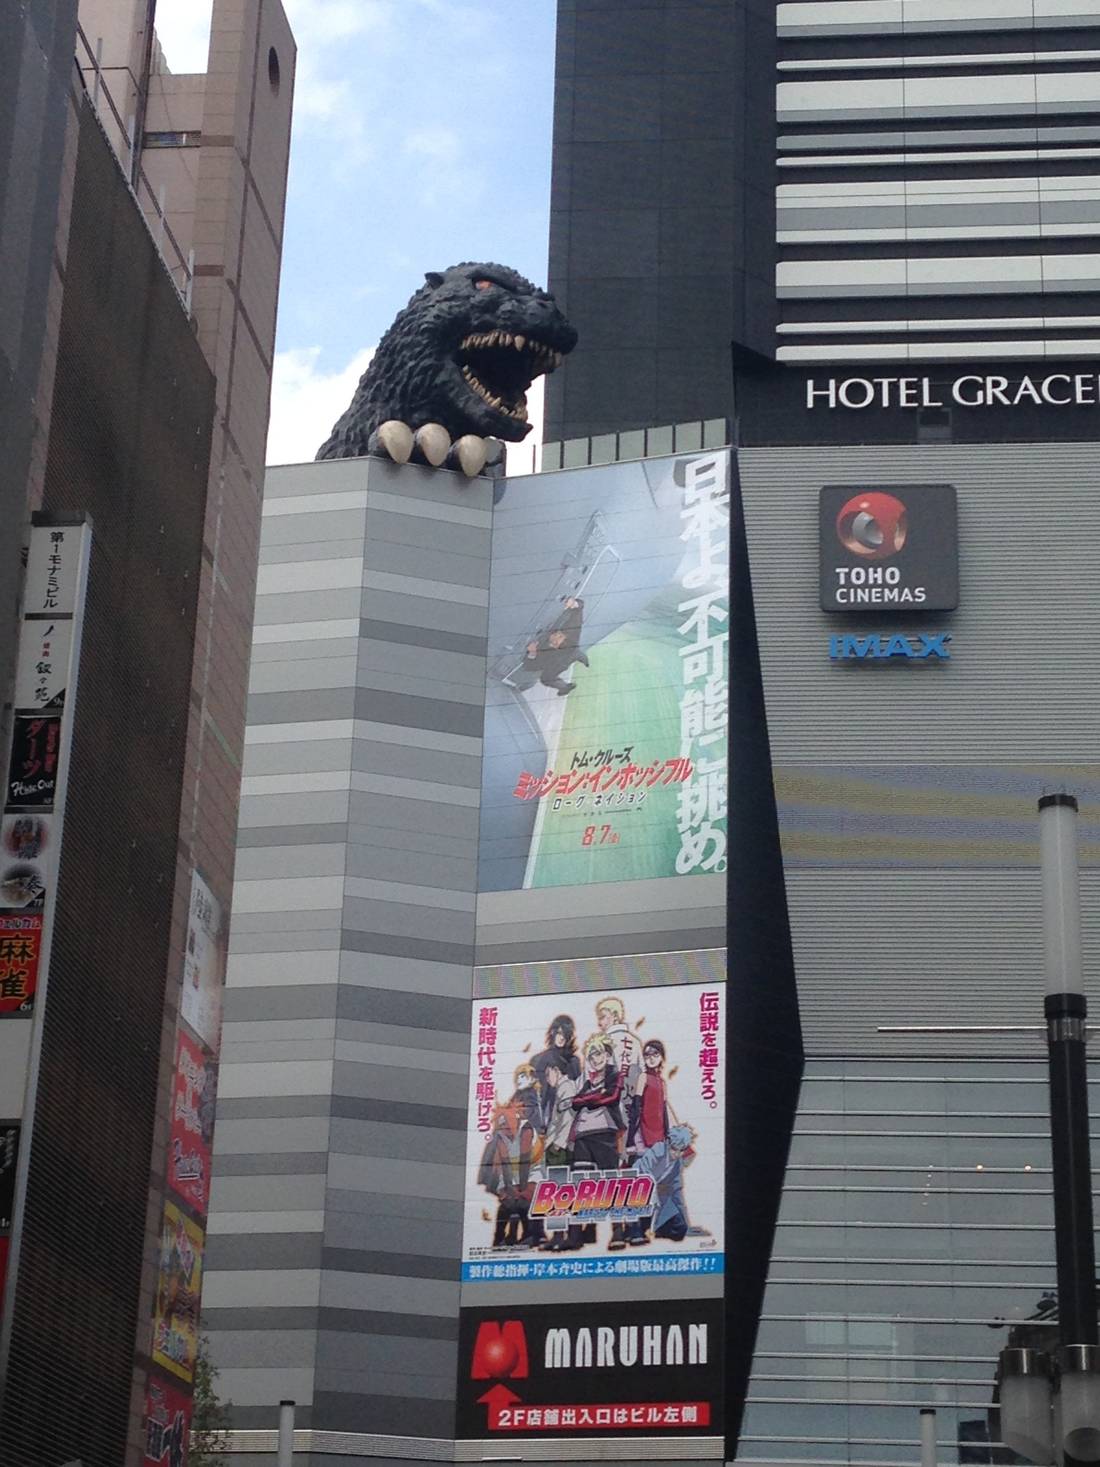 We flew to Tokyo to meet our friends there before we visited Israel. It was cool to visit Shinjuku to say hi to Gozilla 😀